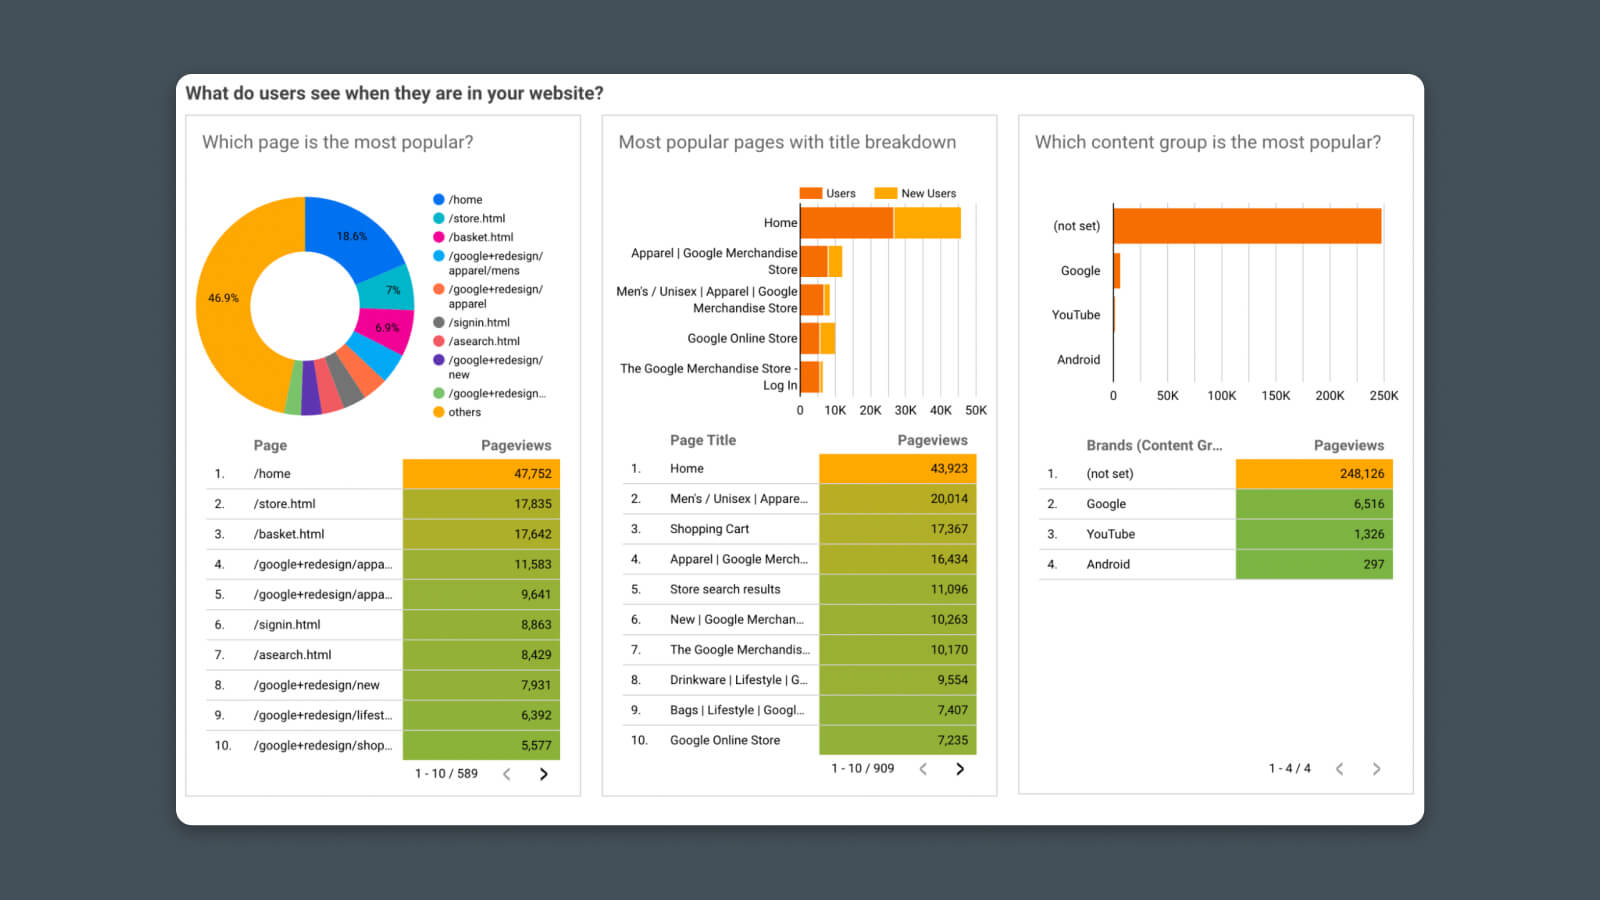 Customer Journey dashboard. You can better understand how users find your website and navigate it. We can see the most popular content and interactions such as "Site content data" and "Landing page reports"